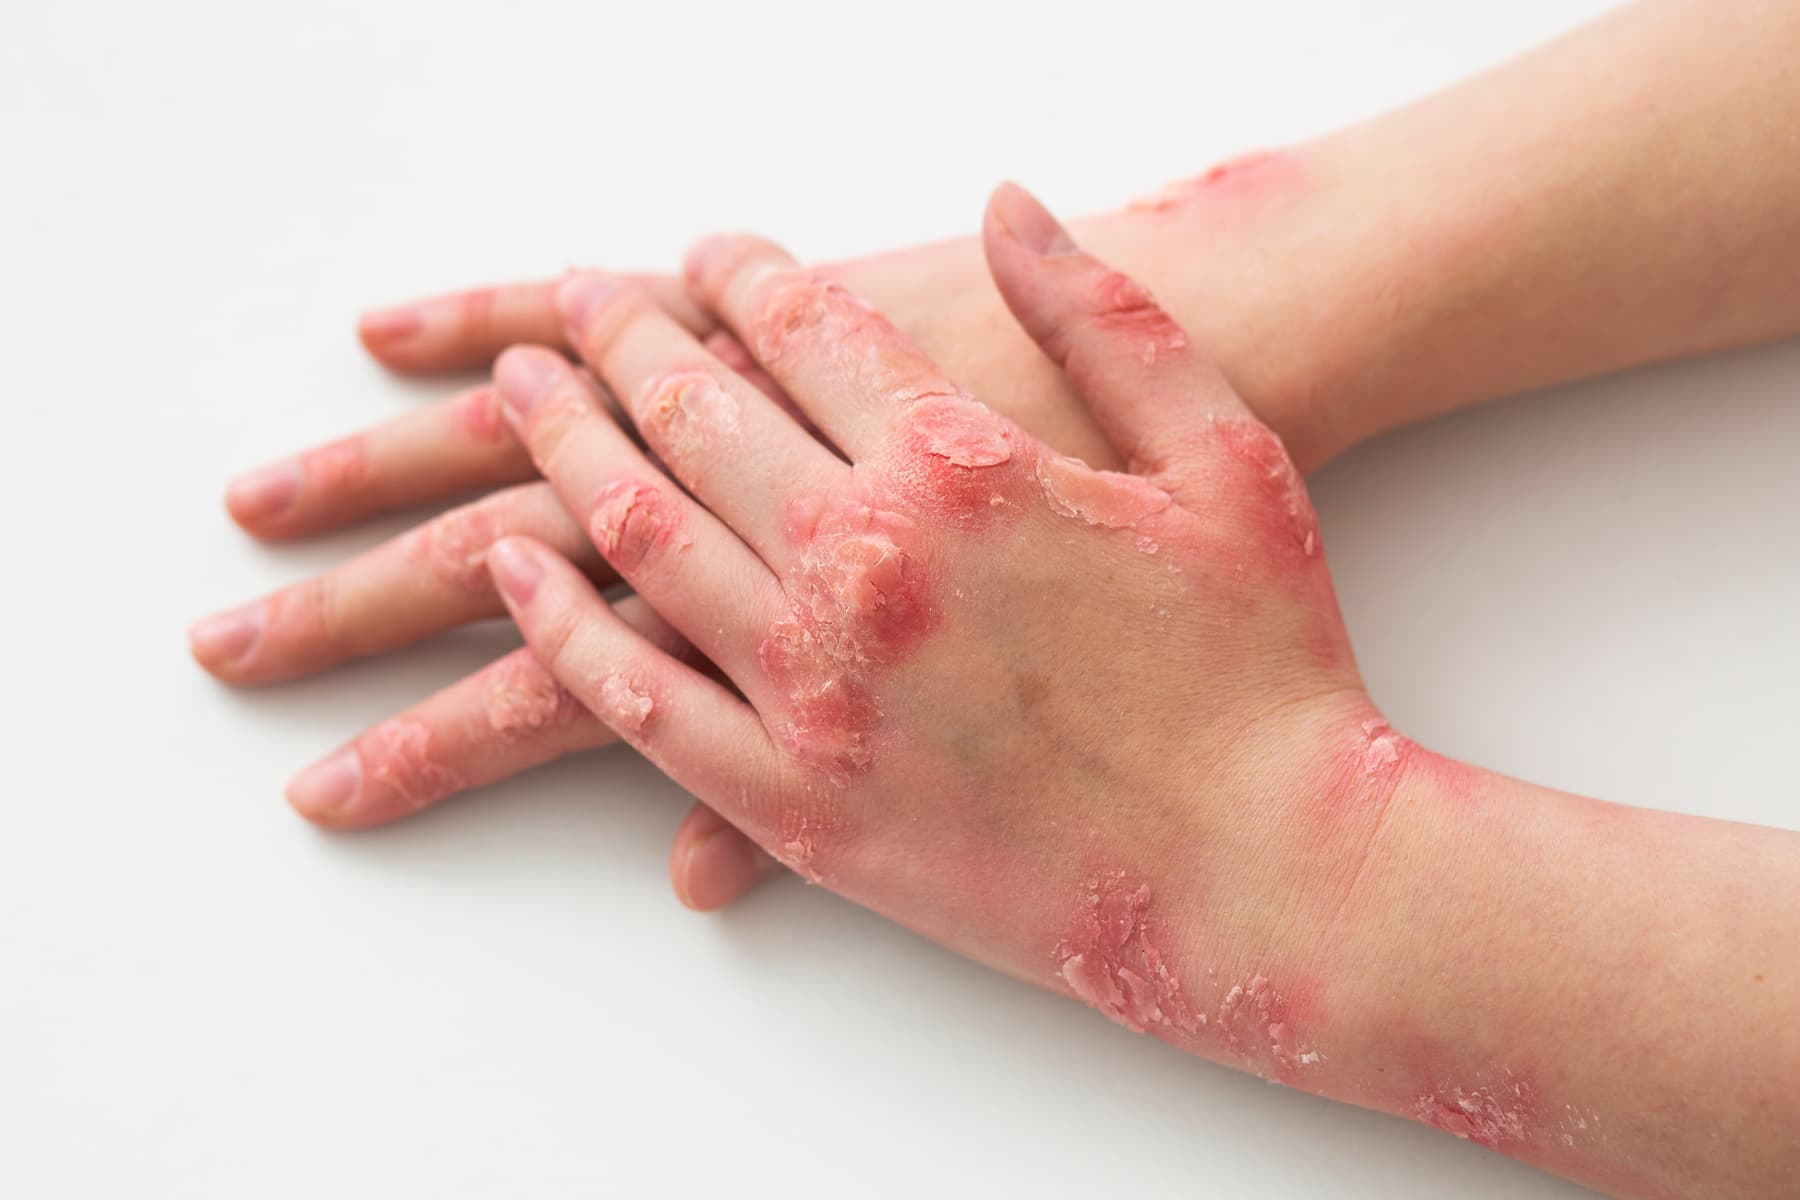 Psoriasis of the skin, nails, joints: causes, symptoms and treatment